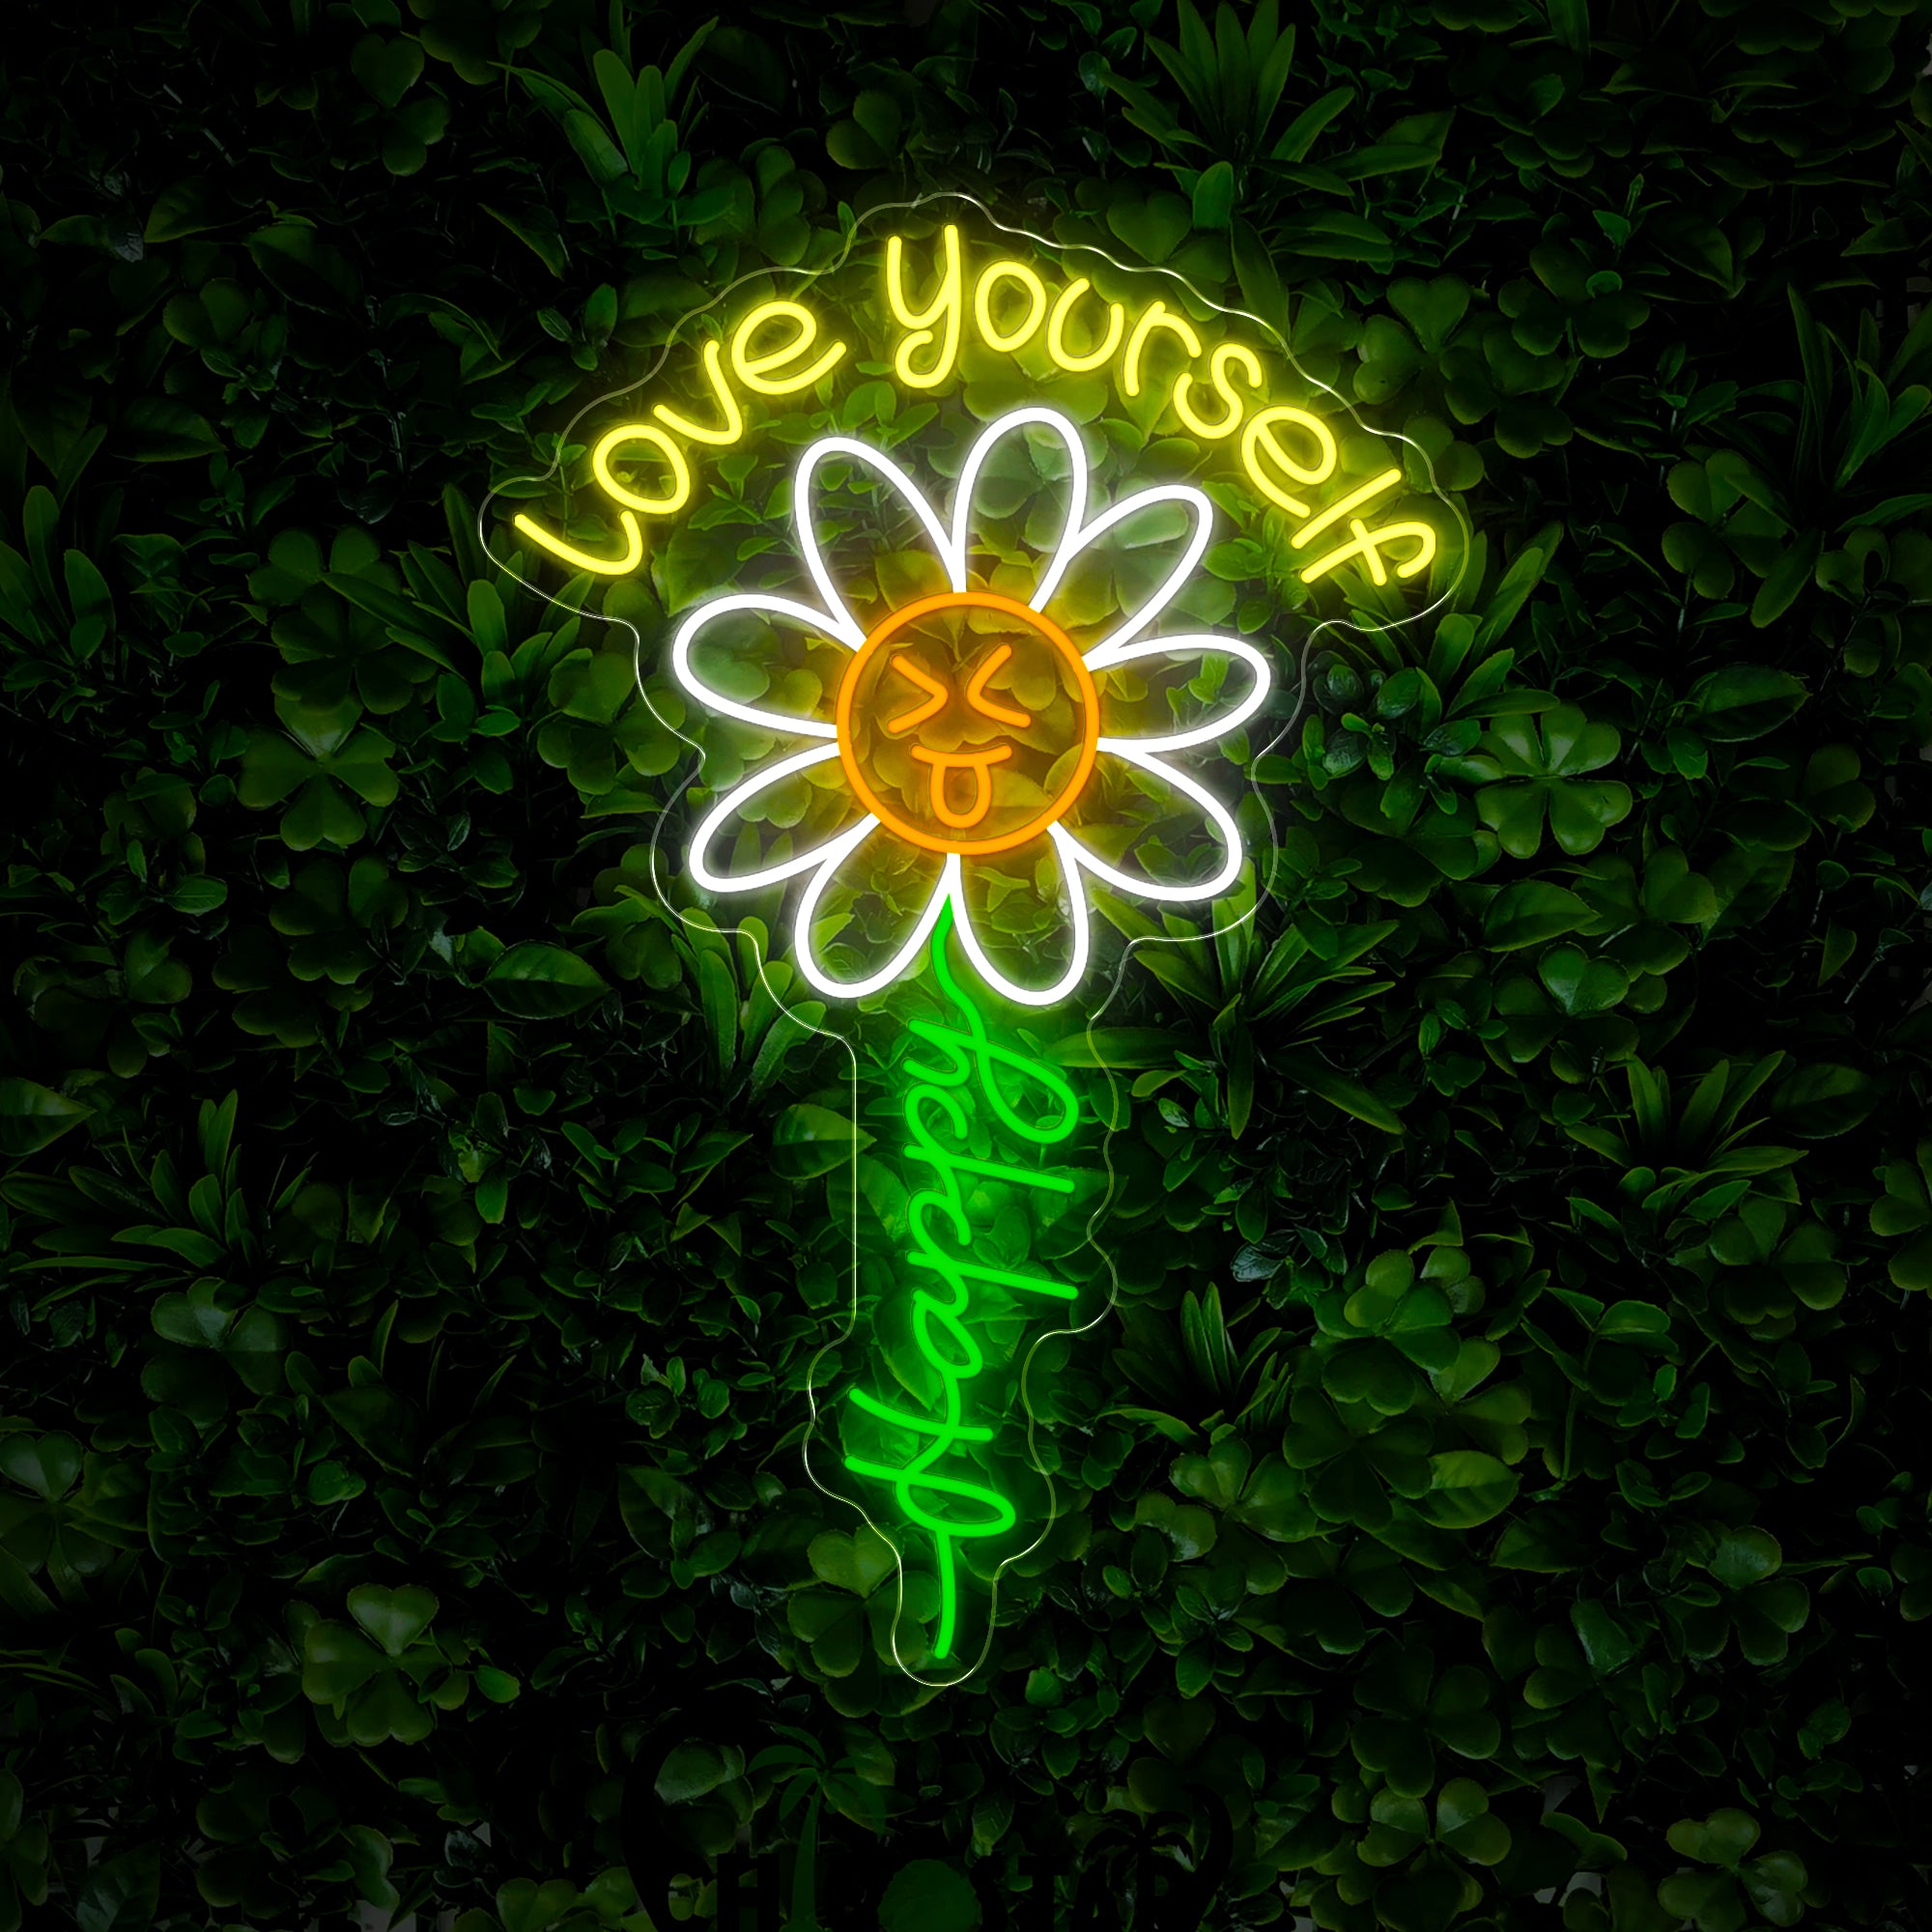 Love Yourself Neon Sign